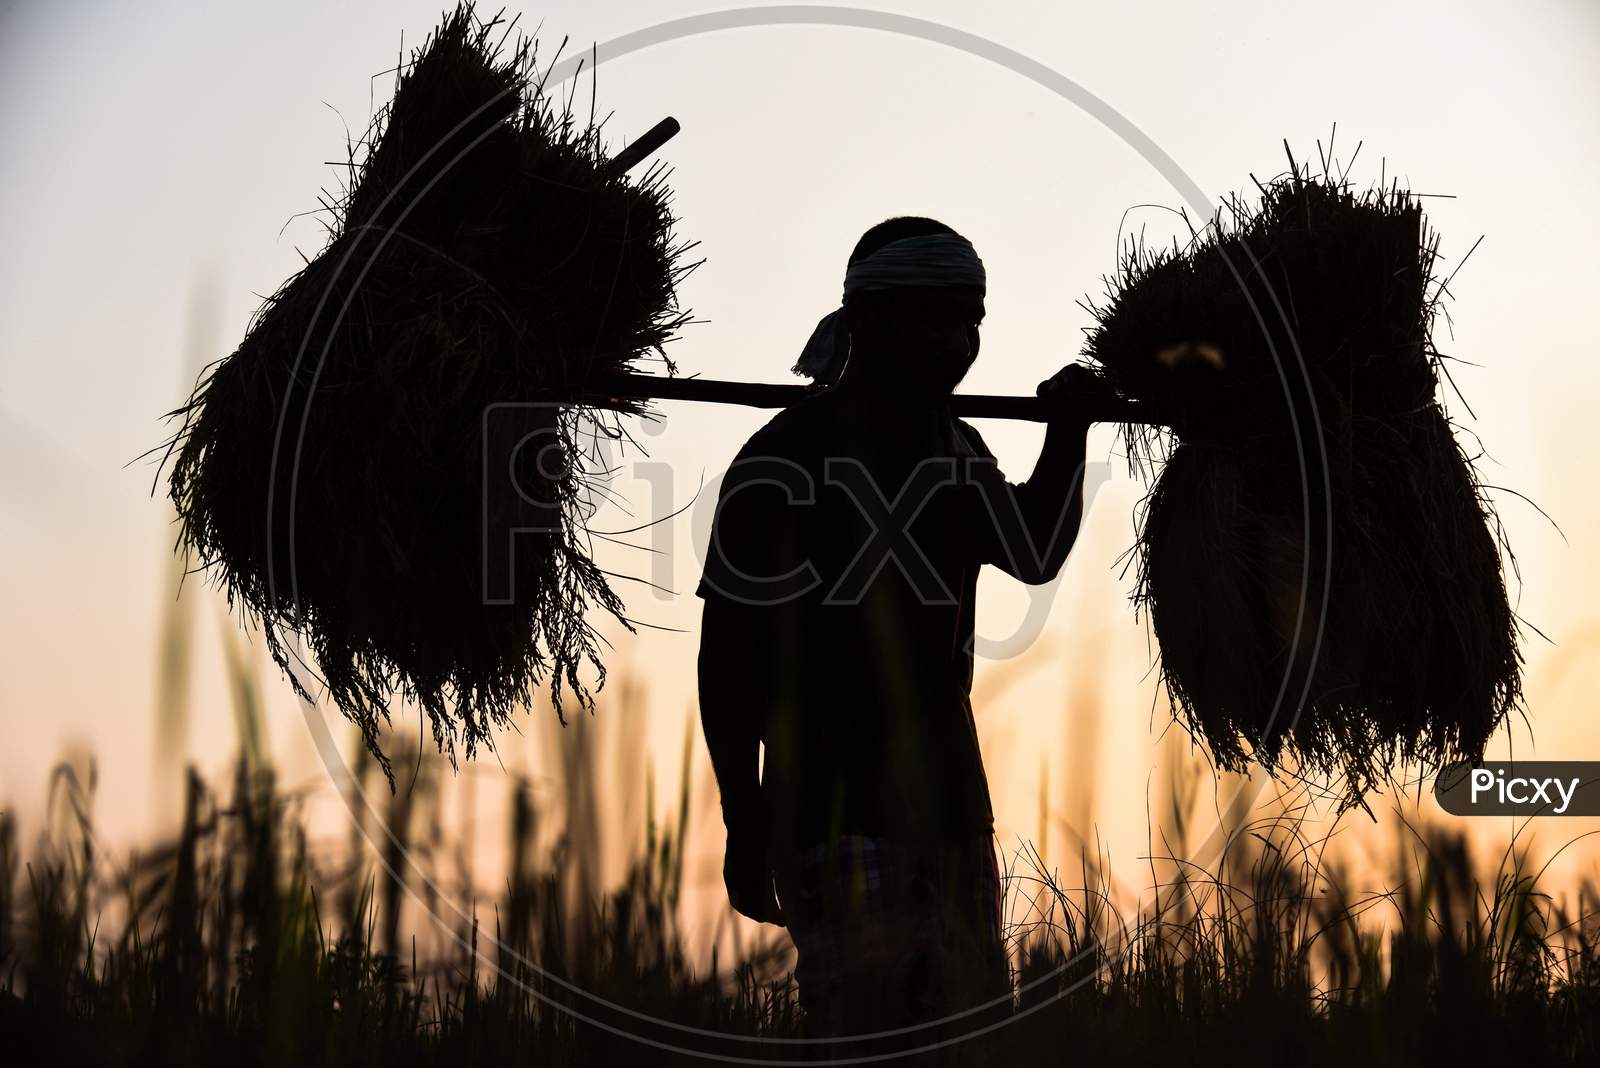 A Farmer Carries His Harvested Paddy During Sunset.